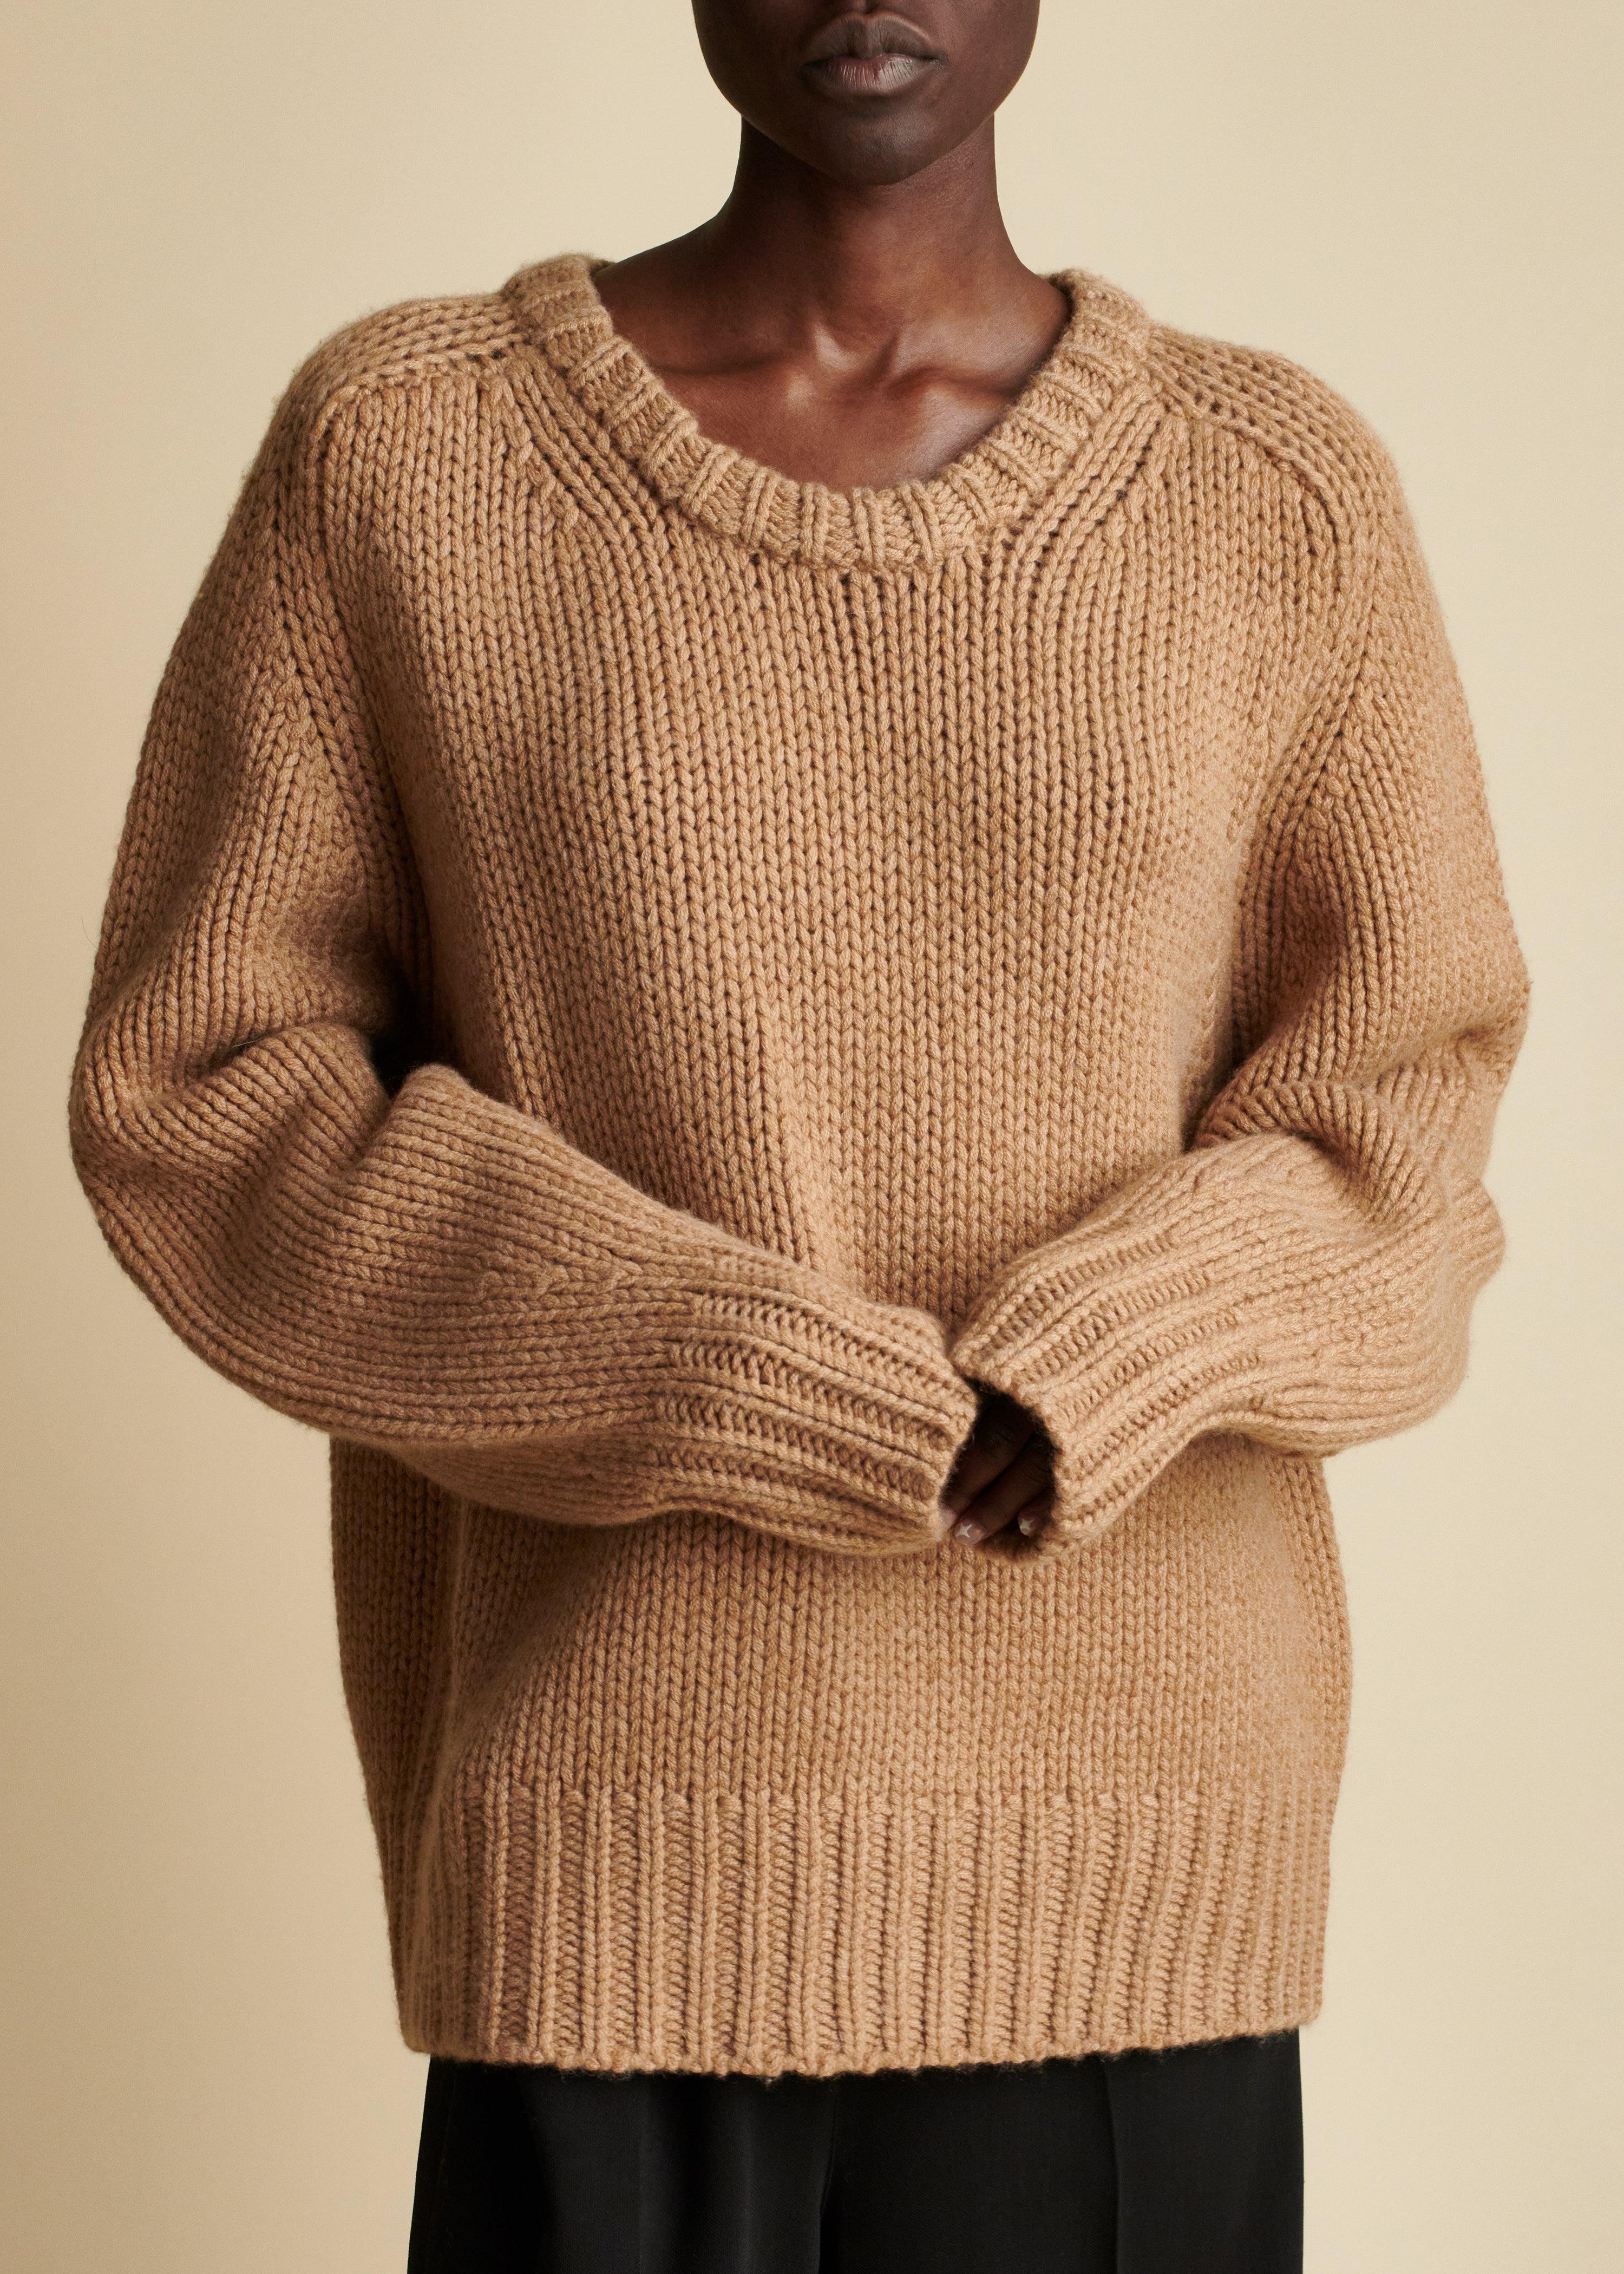 The Mira Sweater in Camel - The Iconic Issue